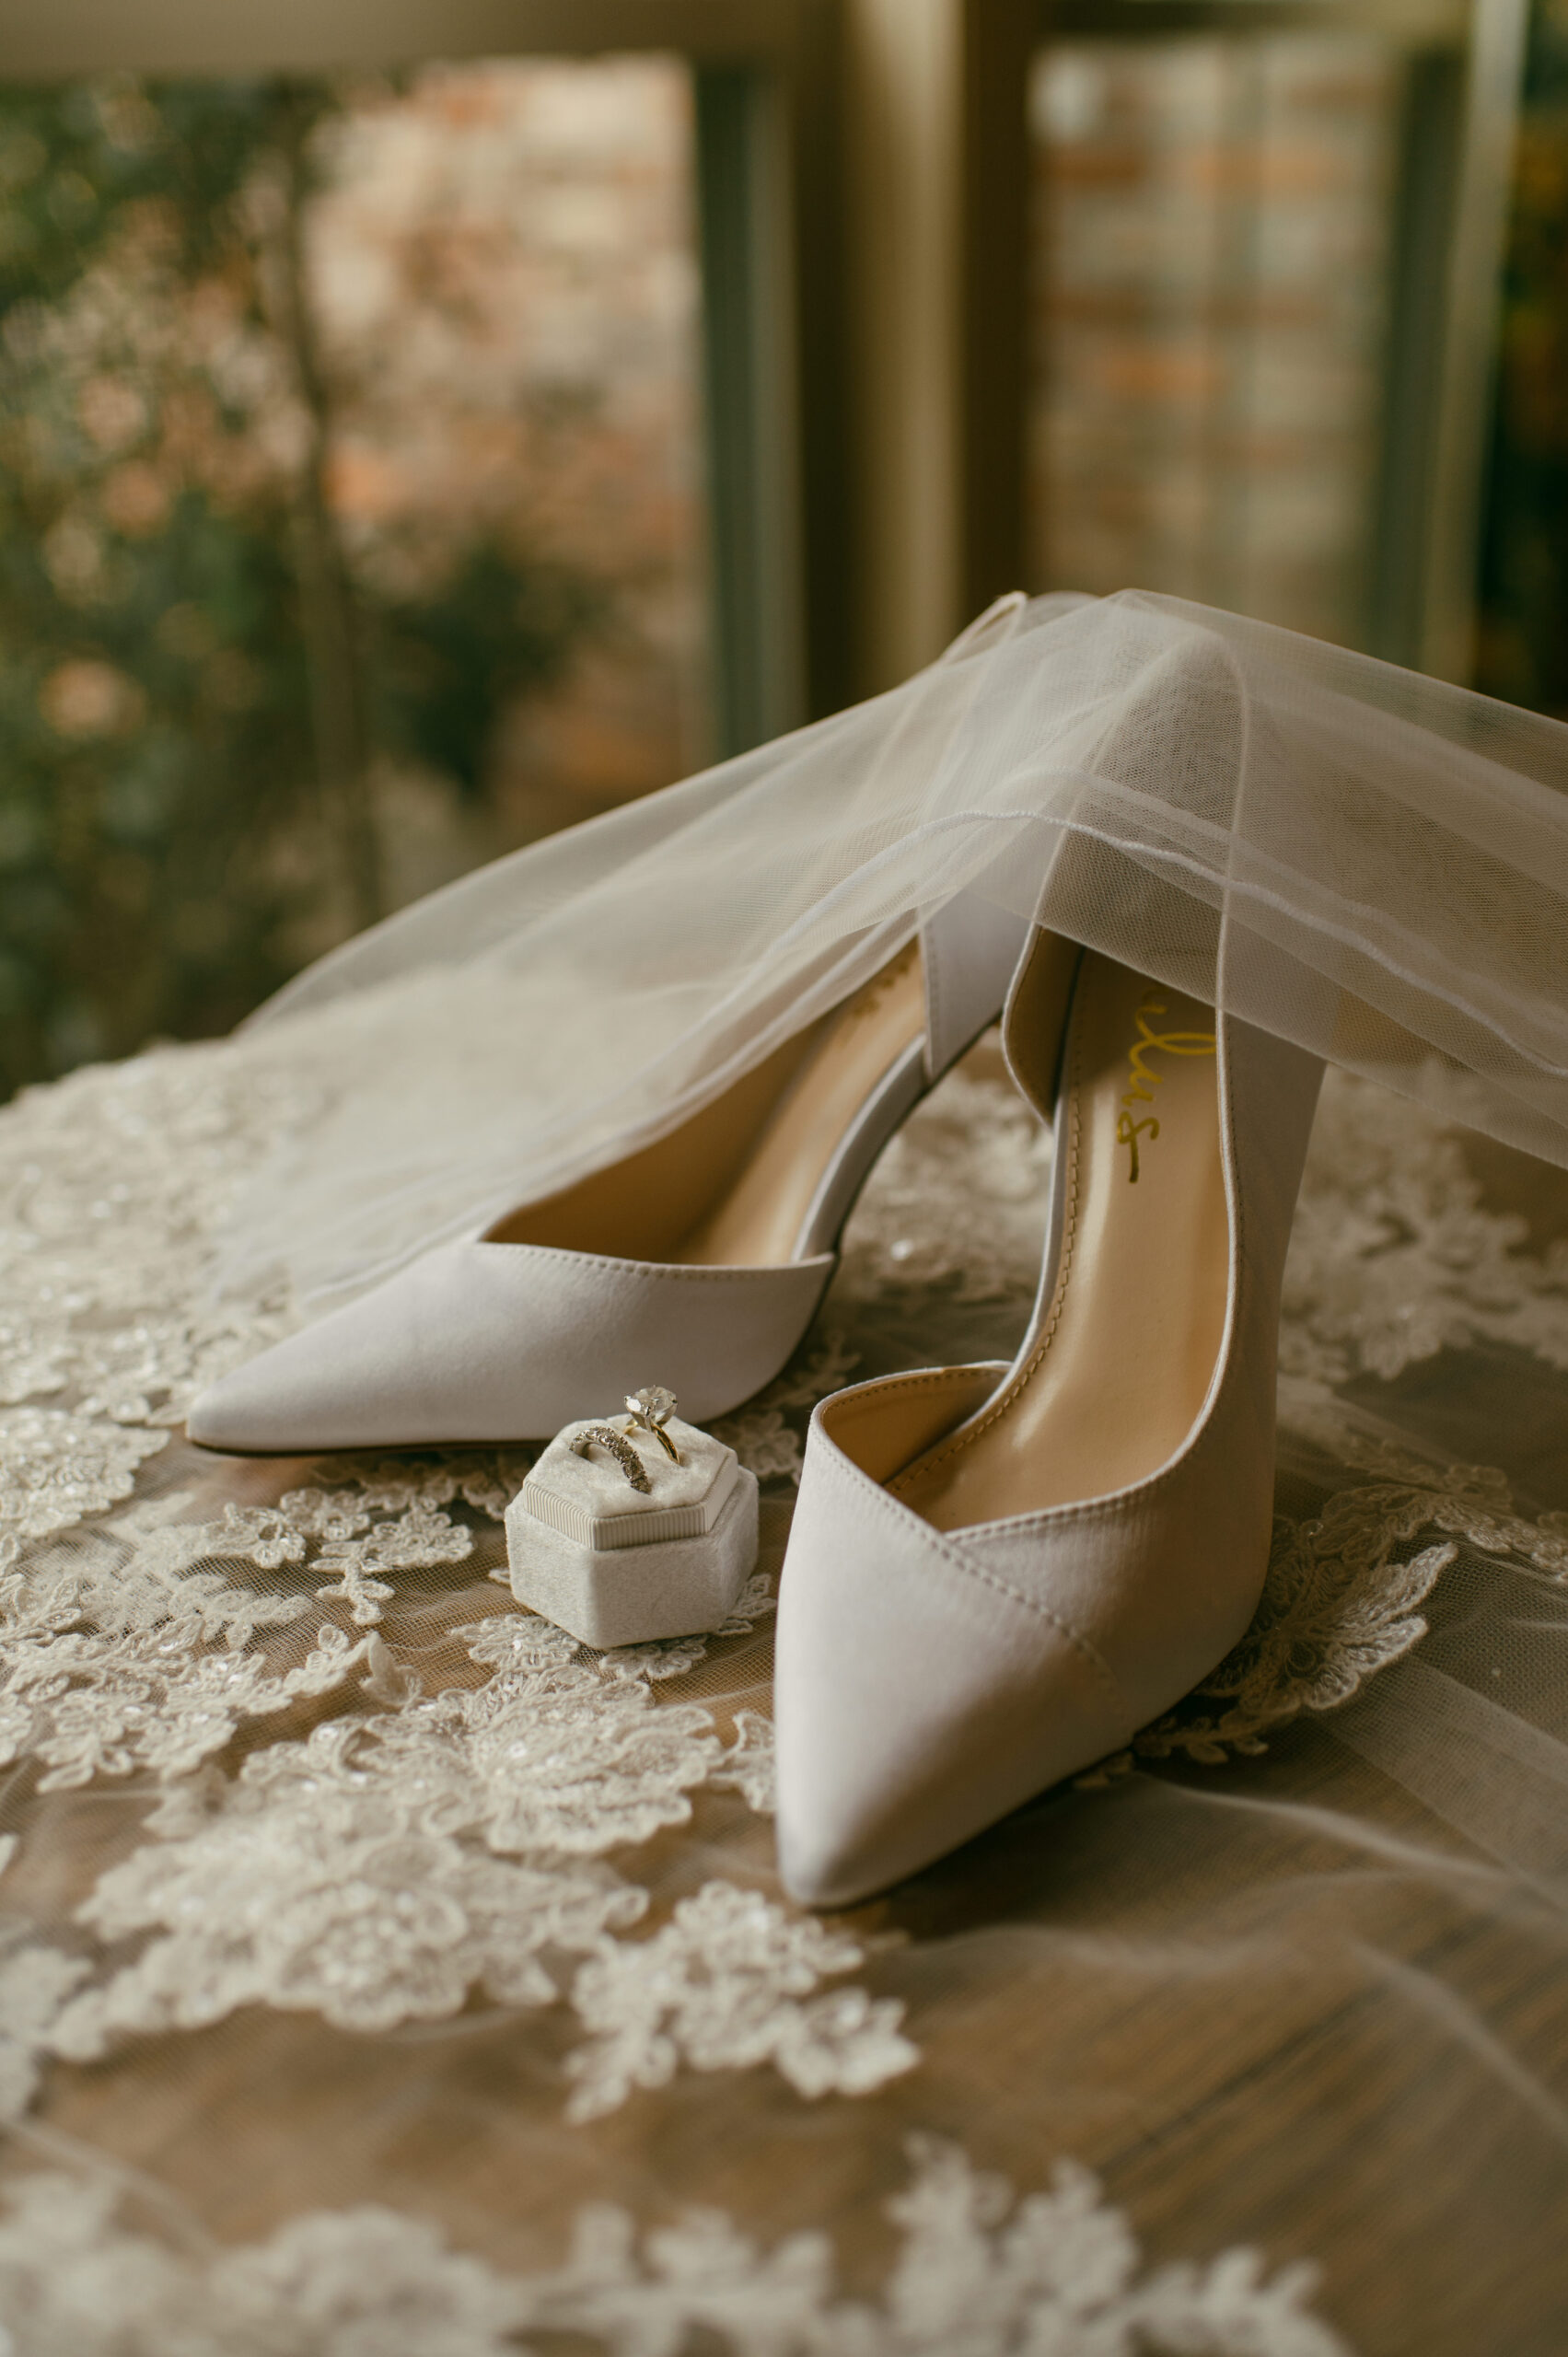 A bride's shoes lay with her tulle gloves, wedding rings and veil during a details flat lay.